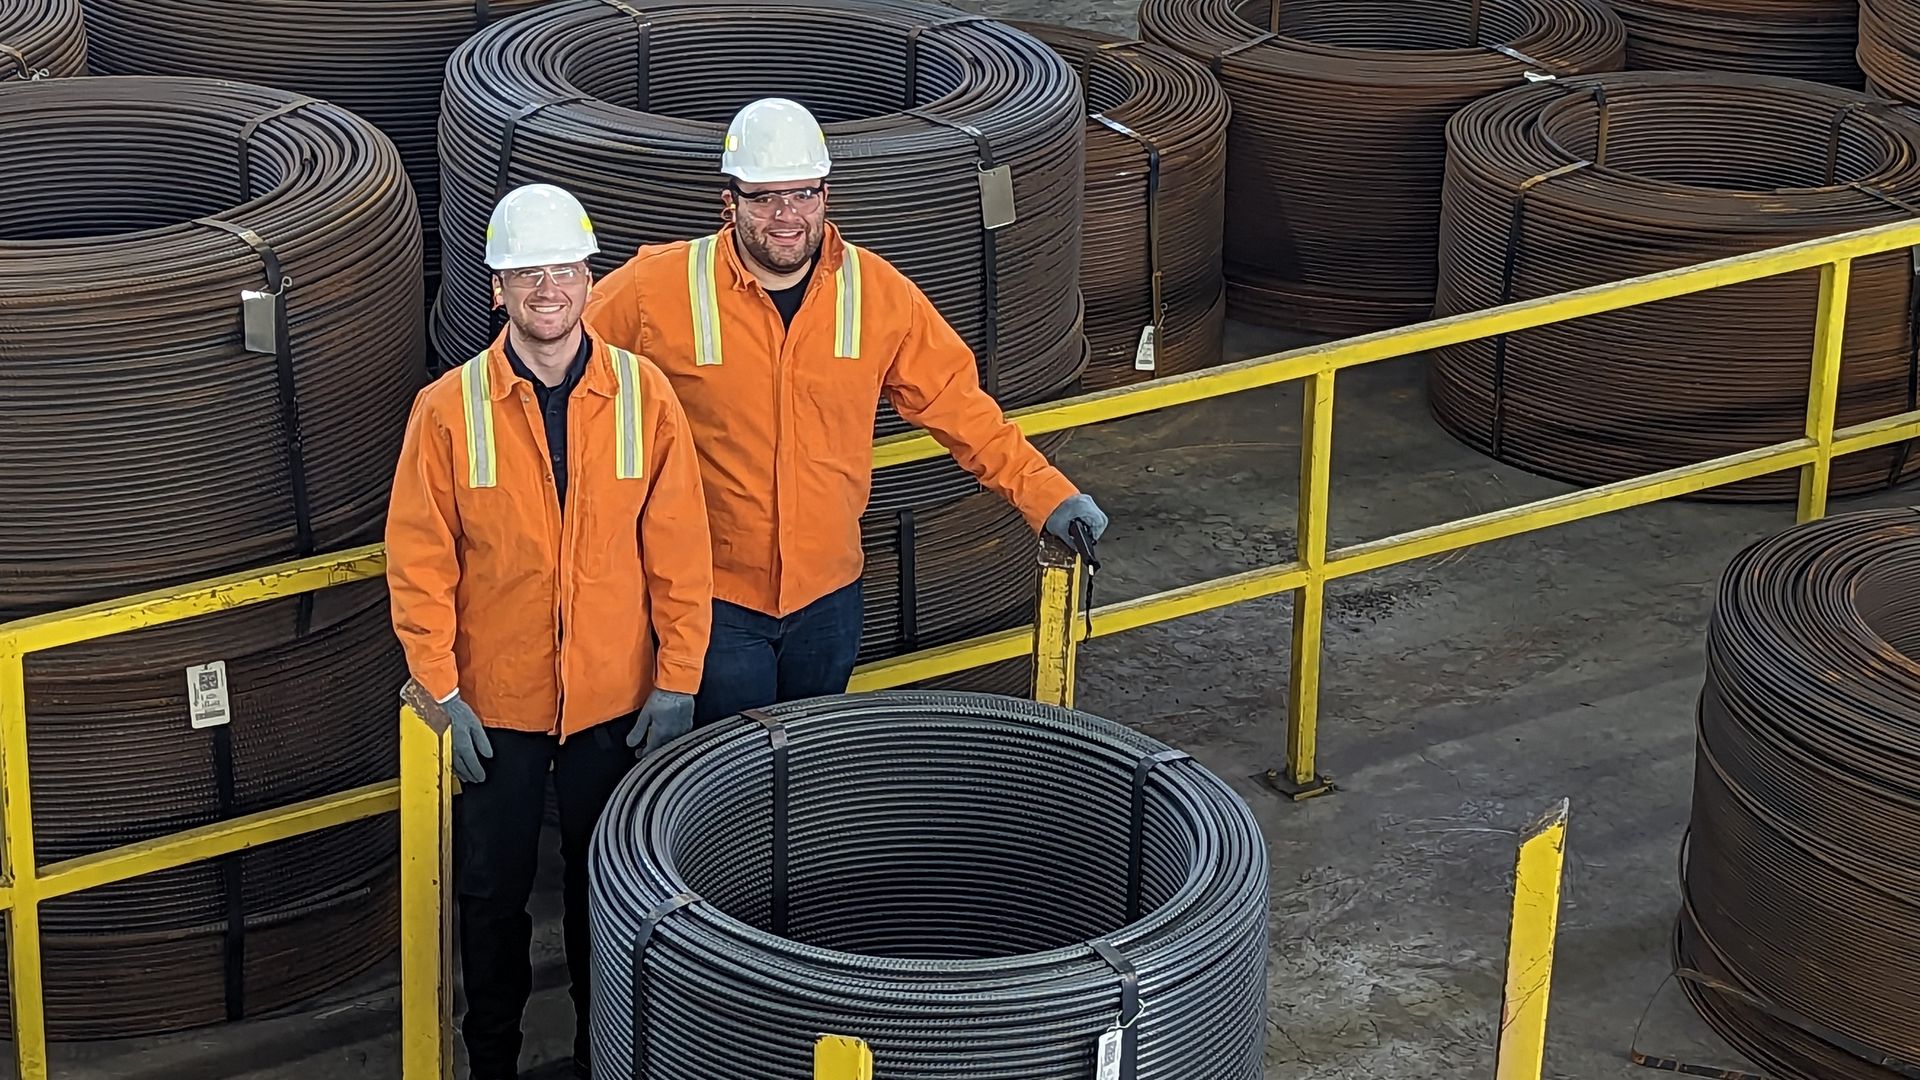 The founders of startup Allium standing behind their stainless steel coated rebar.